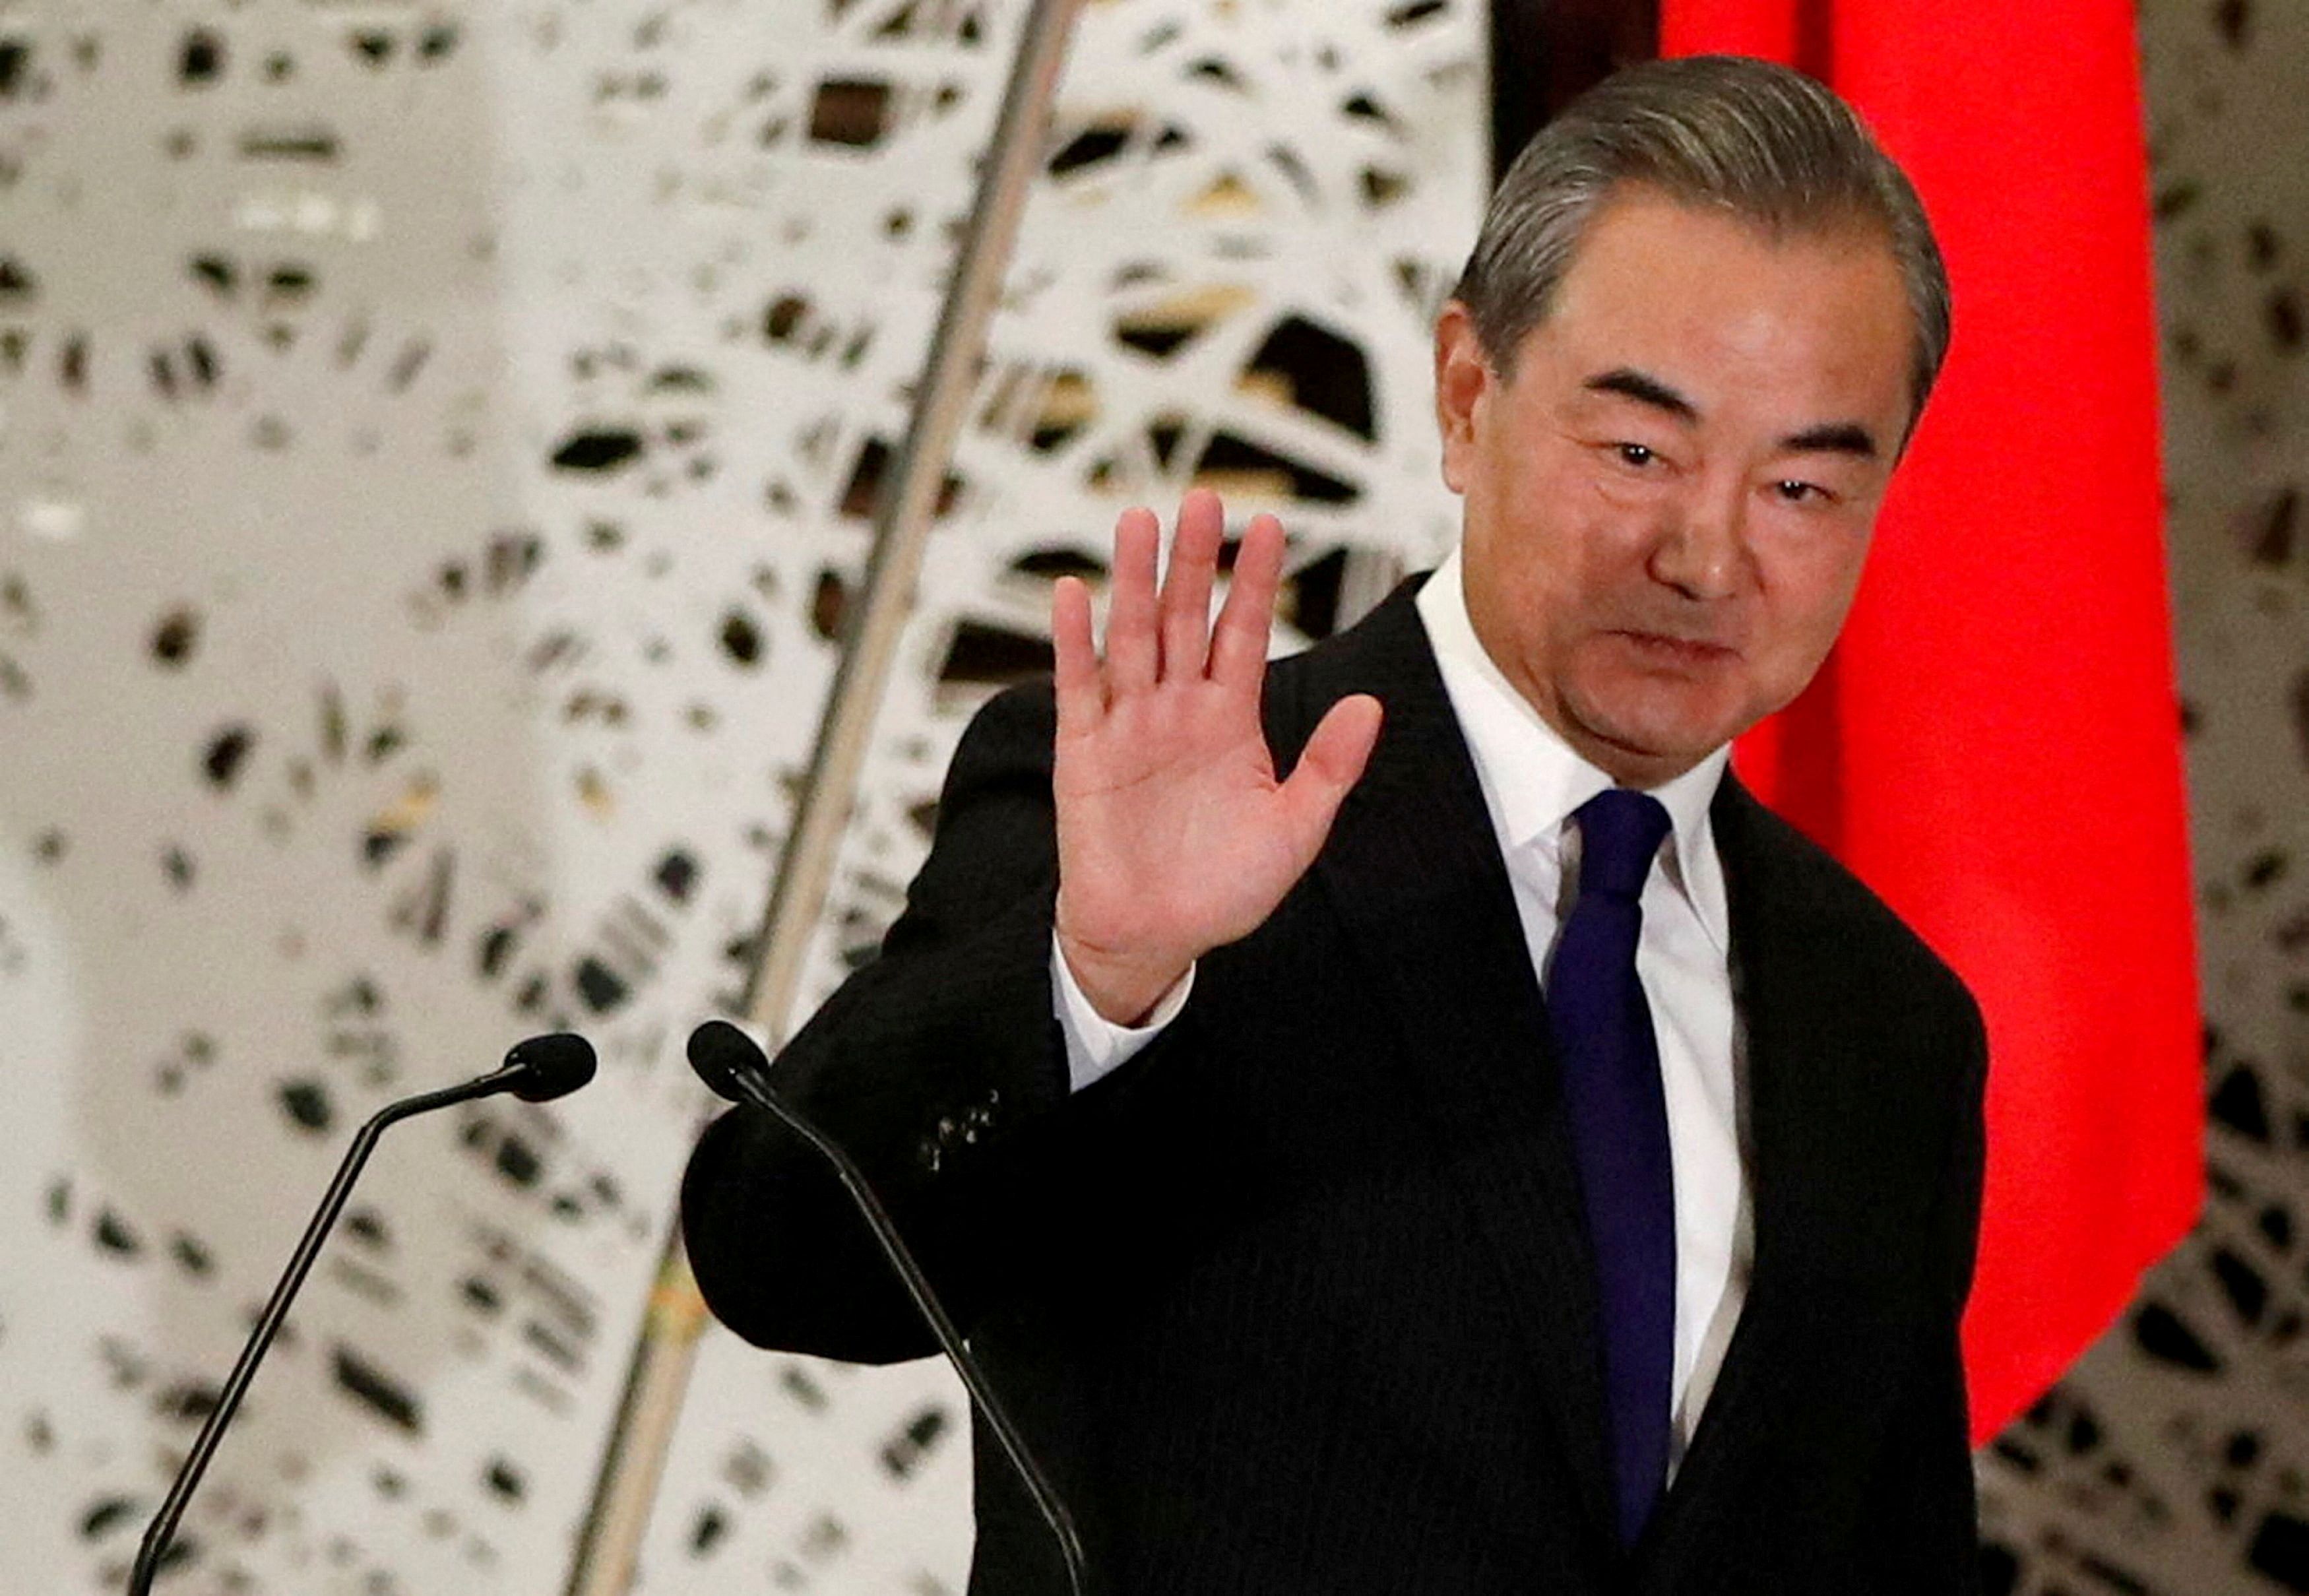 China's Wang Yi, state councillor and foreign minister, waves as he leaves a news conference in Tokyo, Japan, November 24, 2020. REUTERS/Issei Kato/Pool